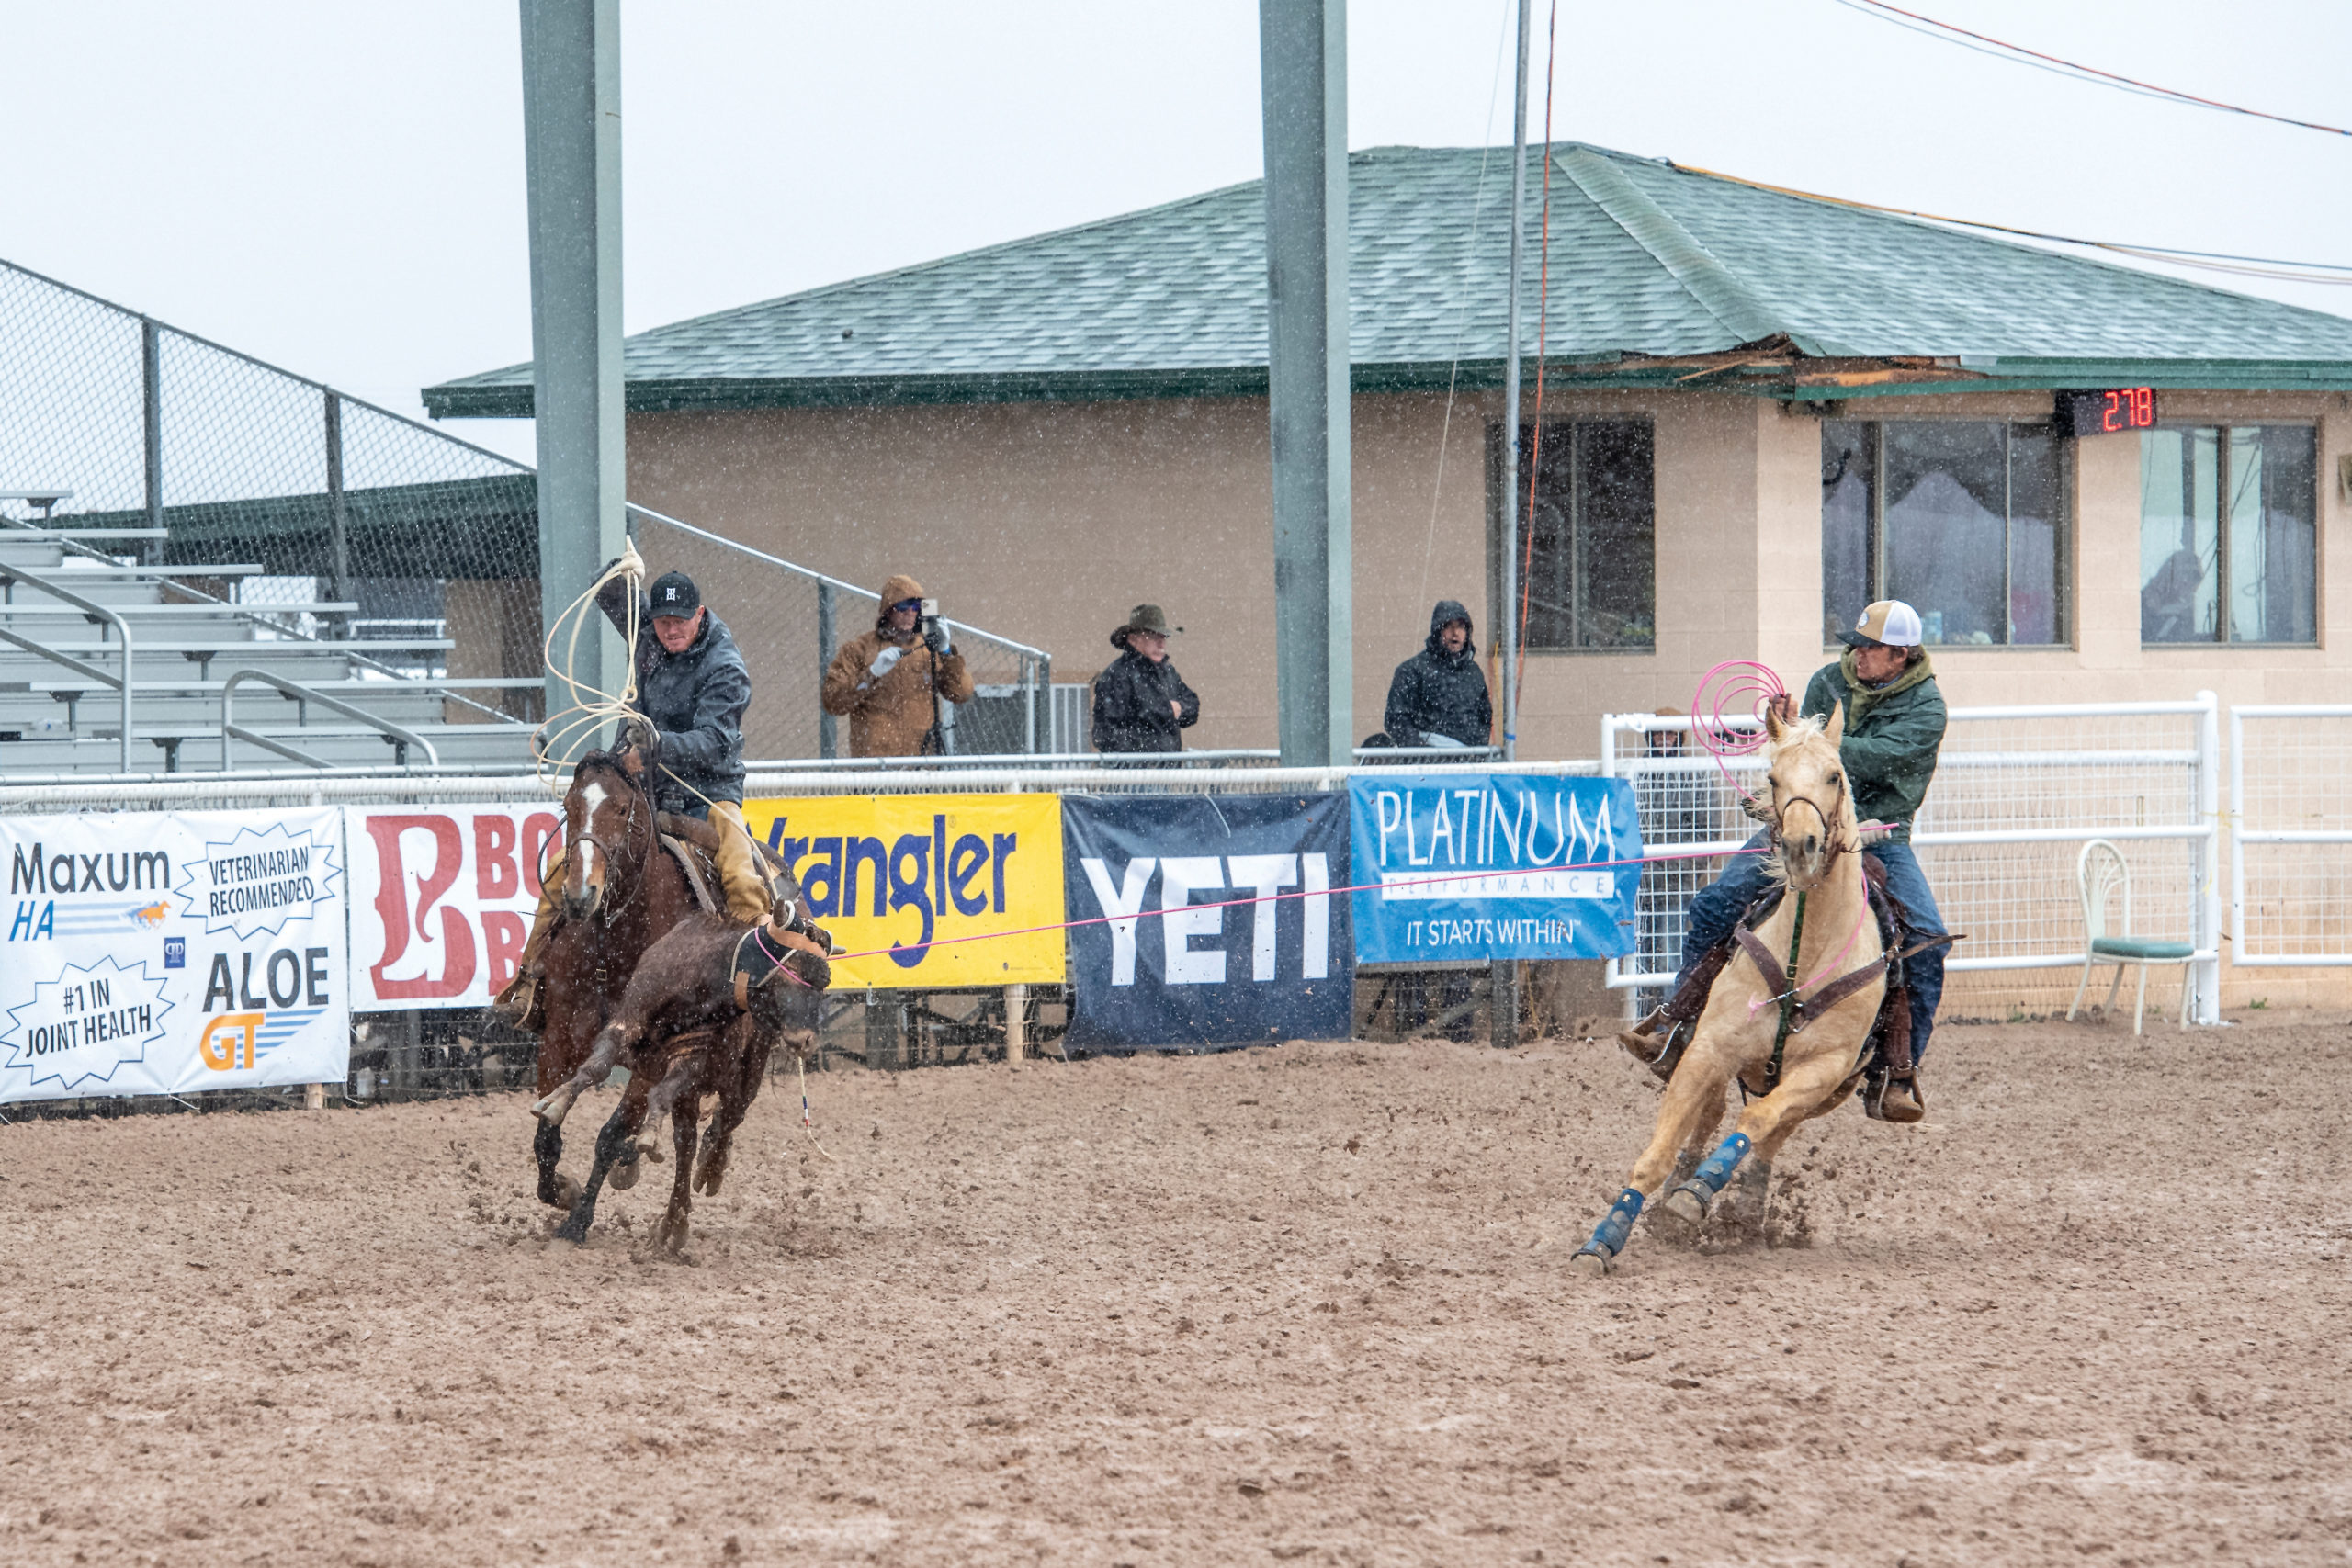 Jeff Flennikens Tips for Roping in the image